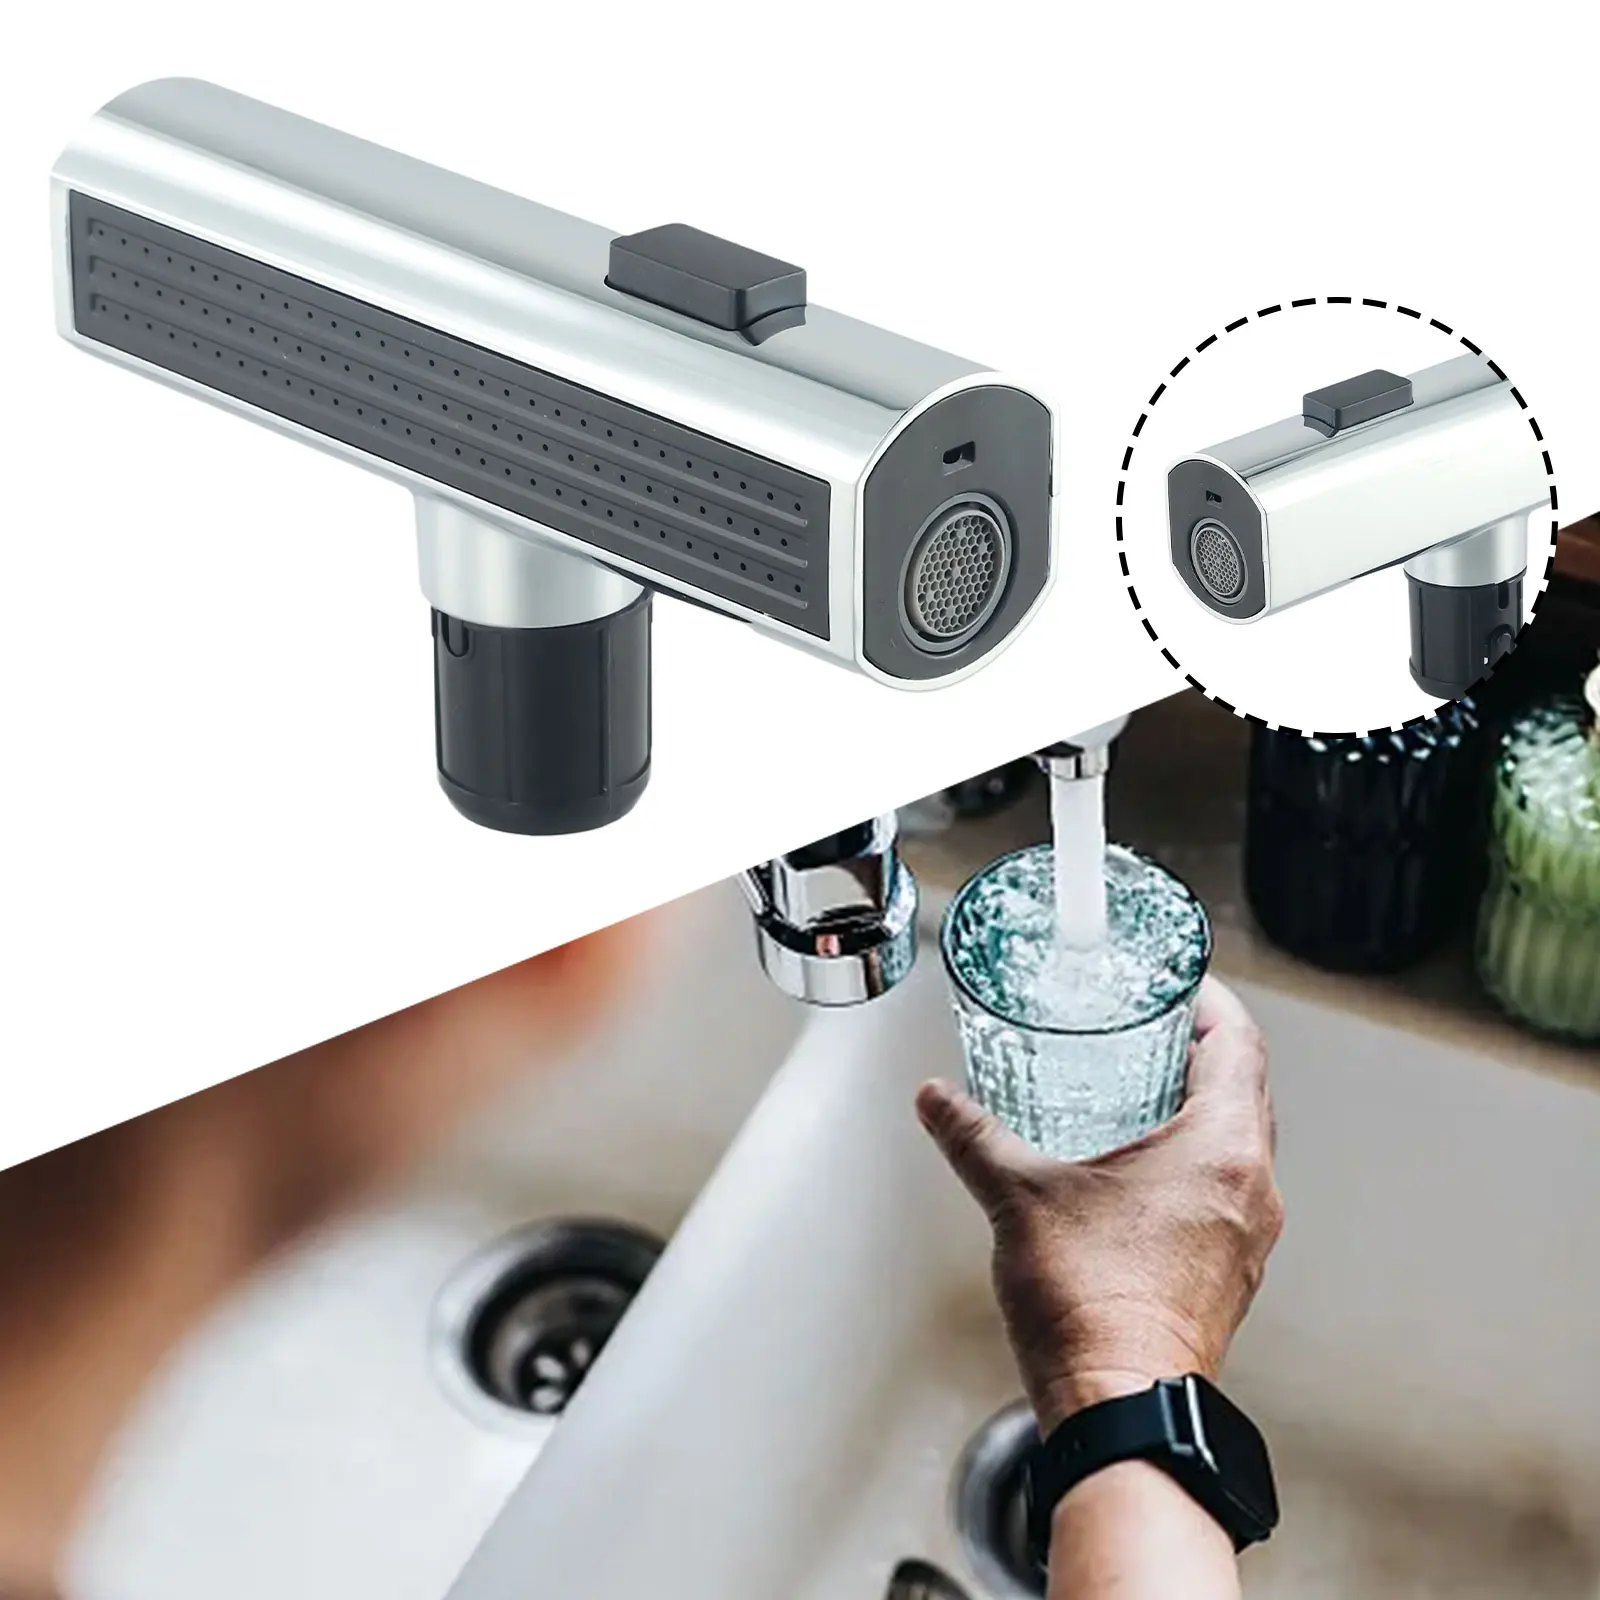 

Supercharged Waterfall Outlet Faucet Wear Resistant and Rust Resistant Easy to Install in Kitchen or Bathroom